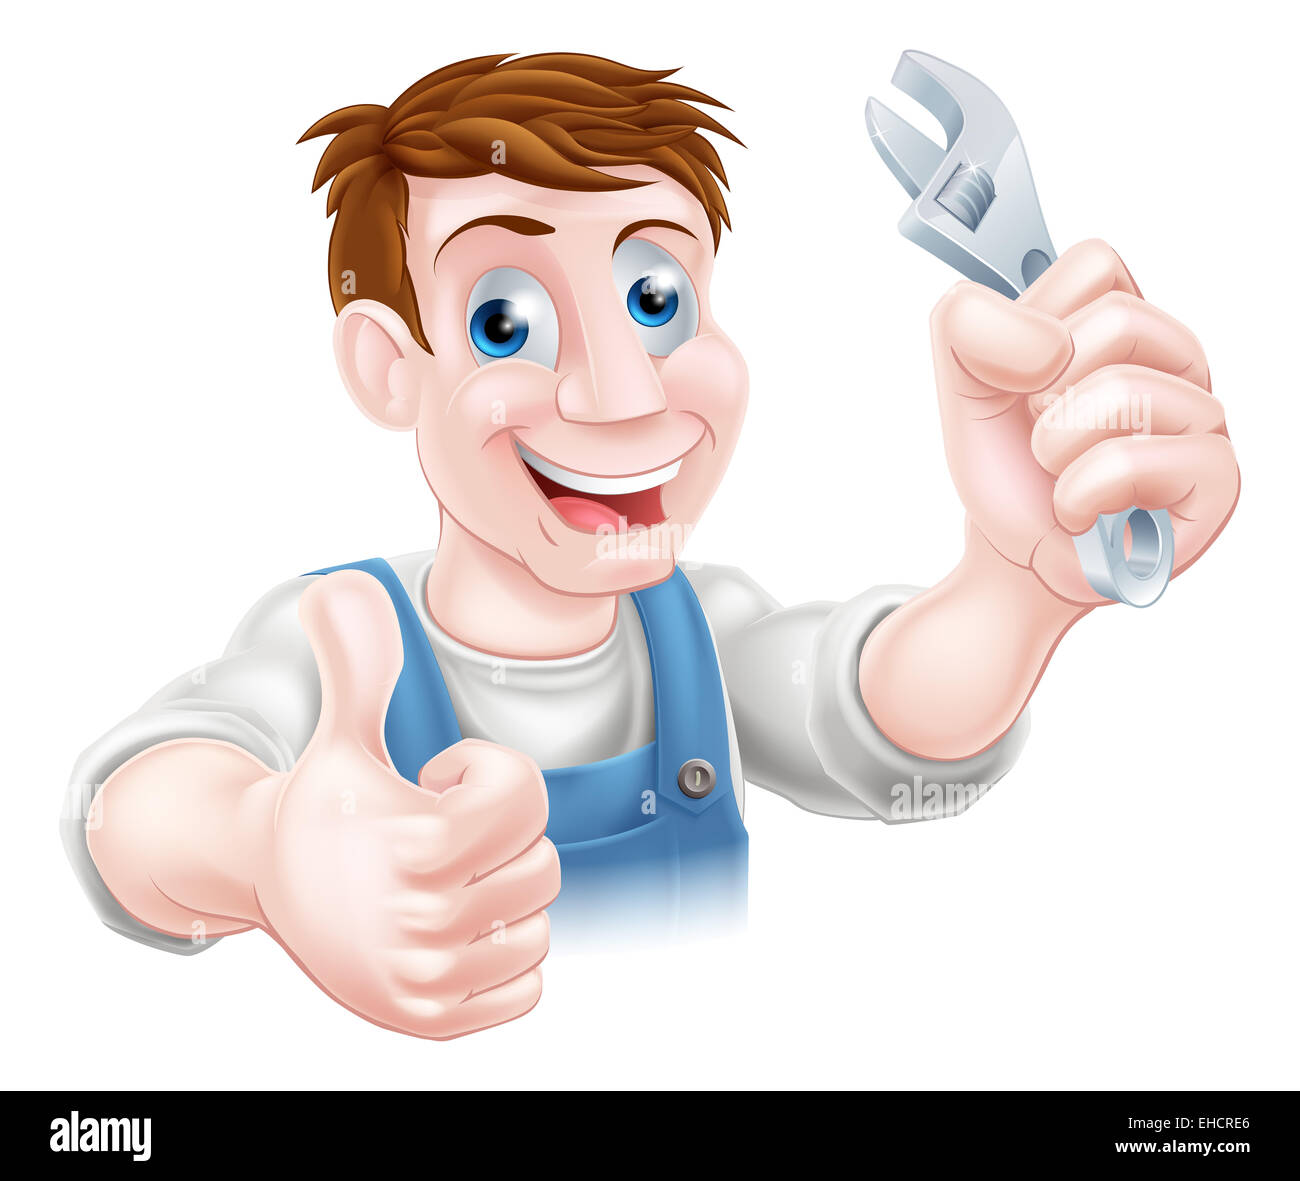 A cartoon plumber or mechanic holding a spanner and giving a thumbs up Stock Photo